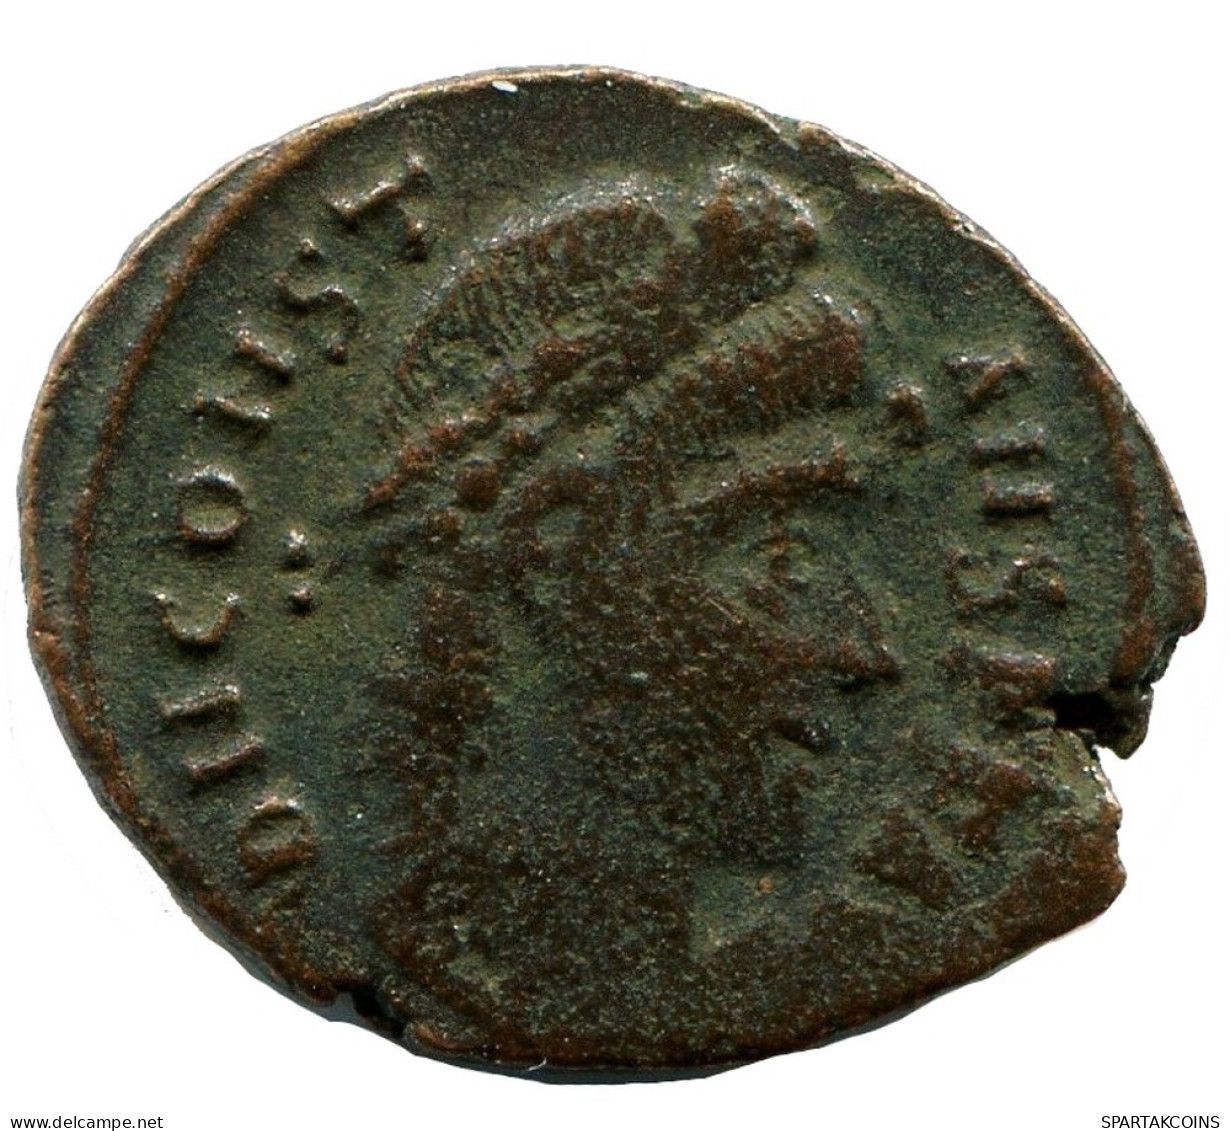 CONSTANS MINTED IN ALEKSANDRIA FROM THE ROYAL ONTARIO MUSEUM #ANC11441.14.U.A - The Christian Empire (307 AD To 363 AD)